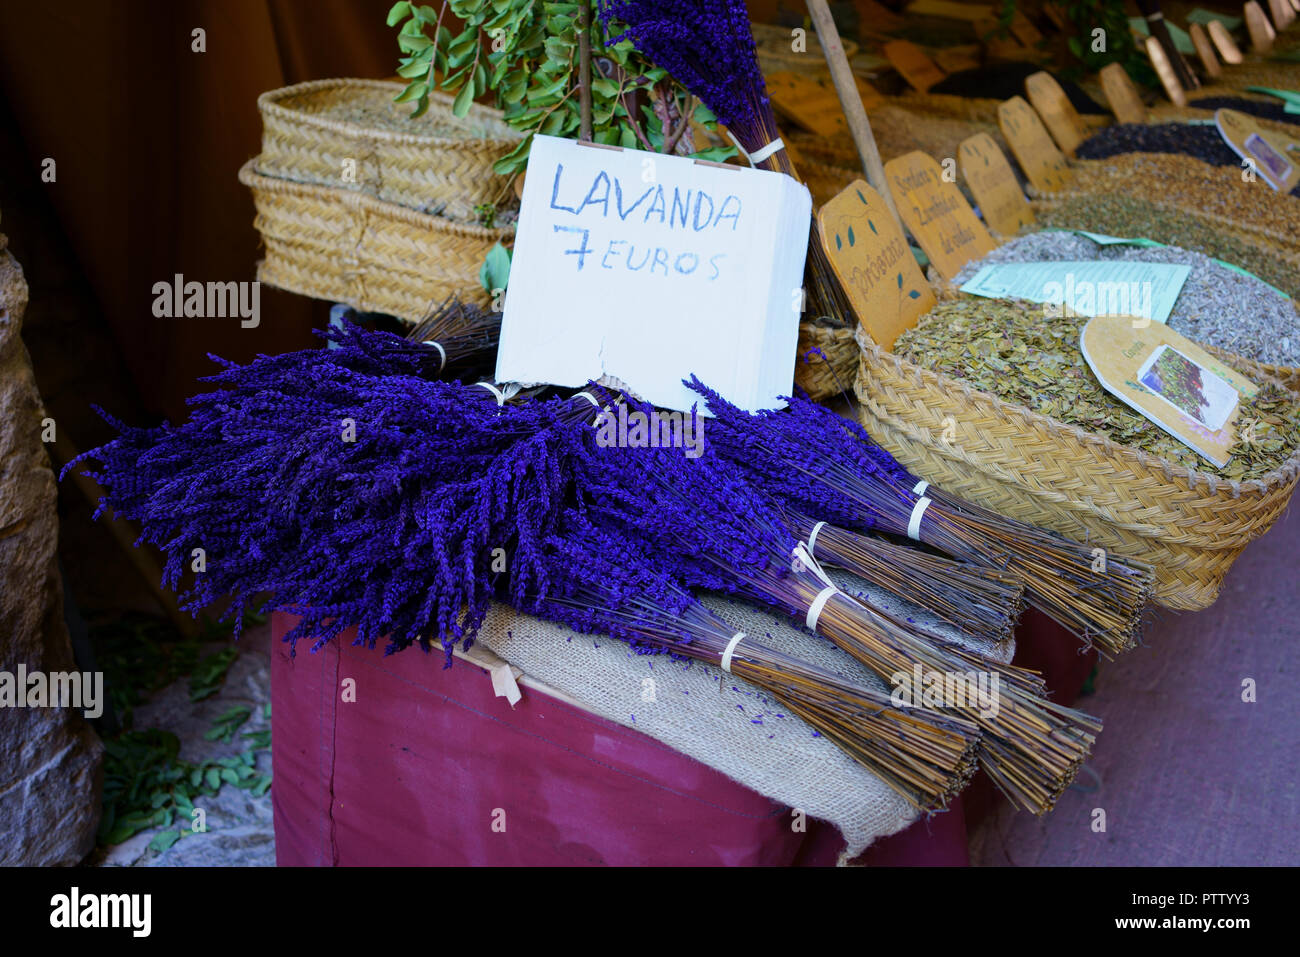 Hand-crafted fragrant Lavender bunch in a Mediterranean market. Stock Photo